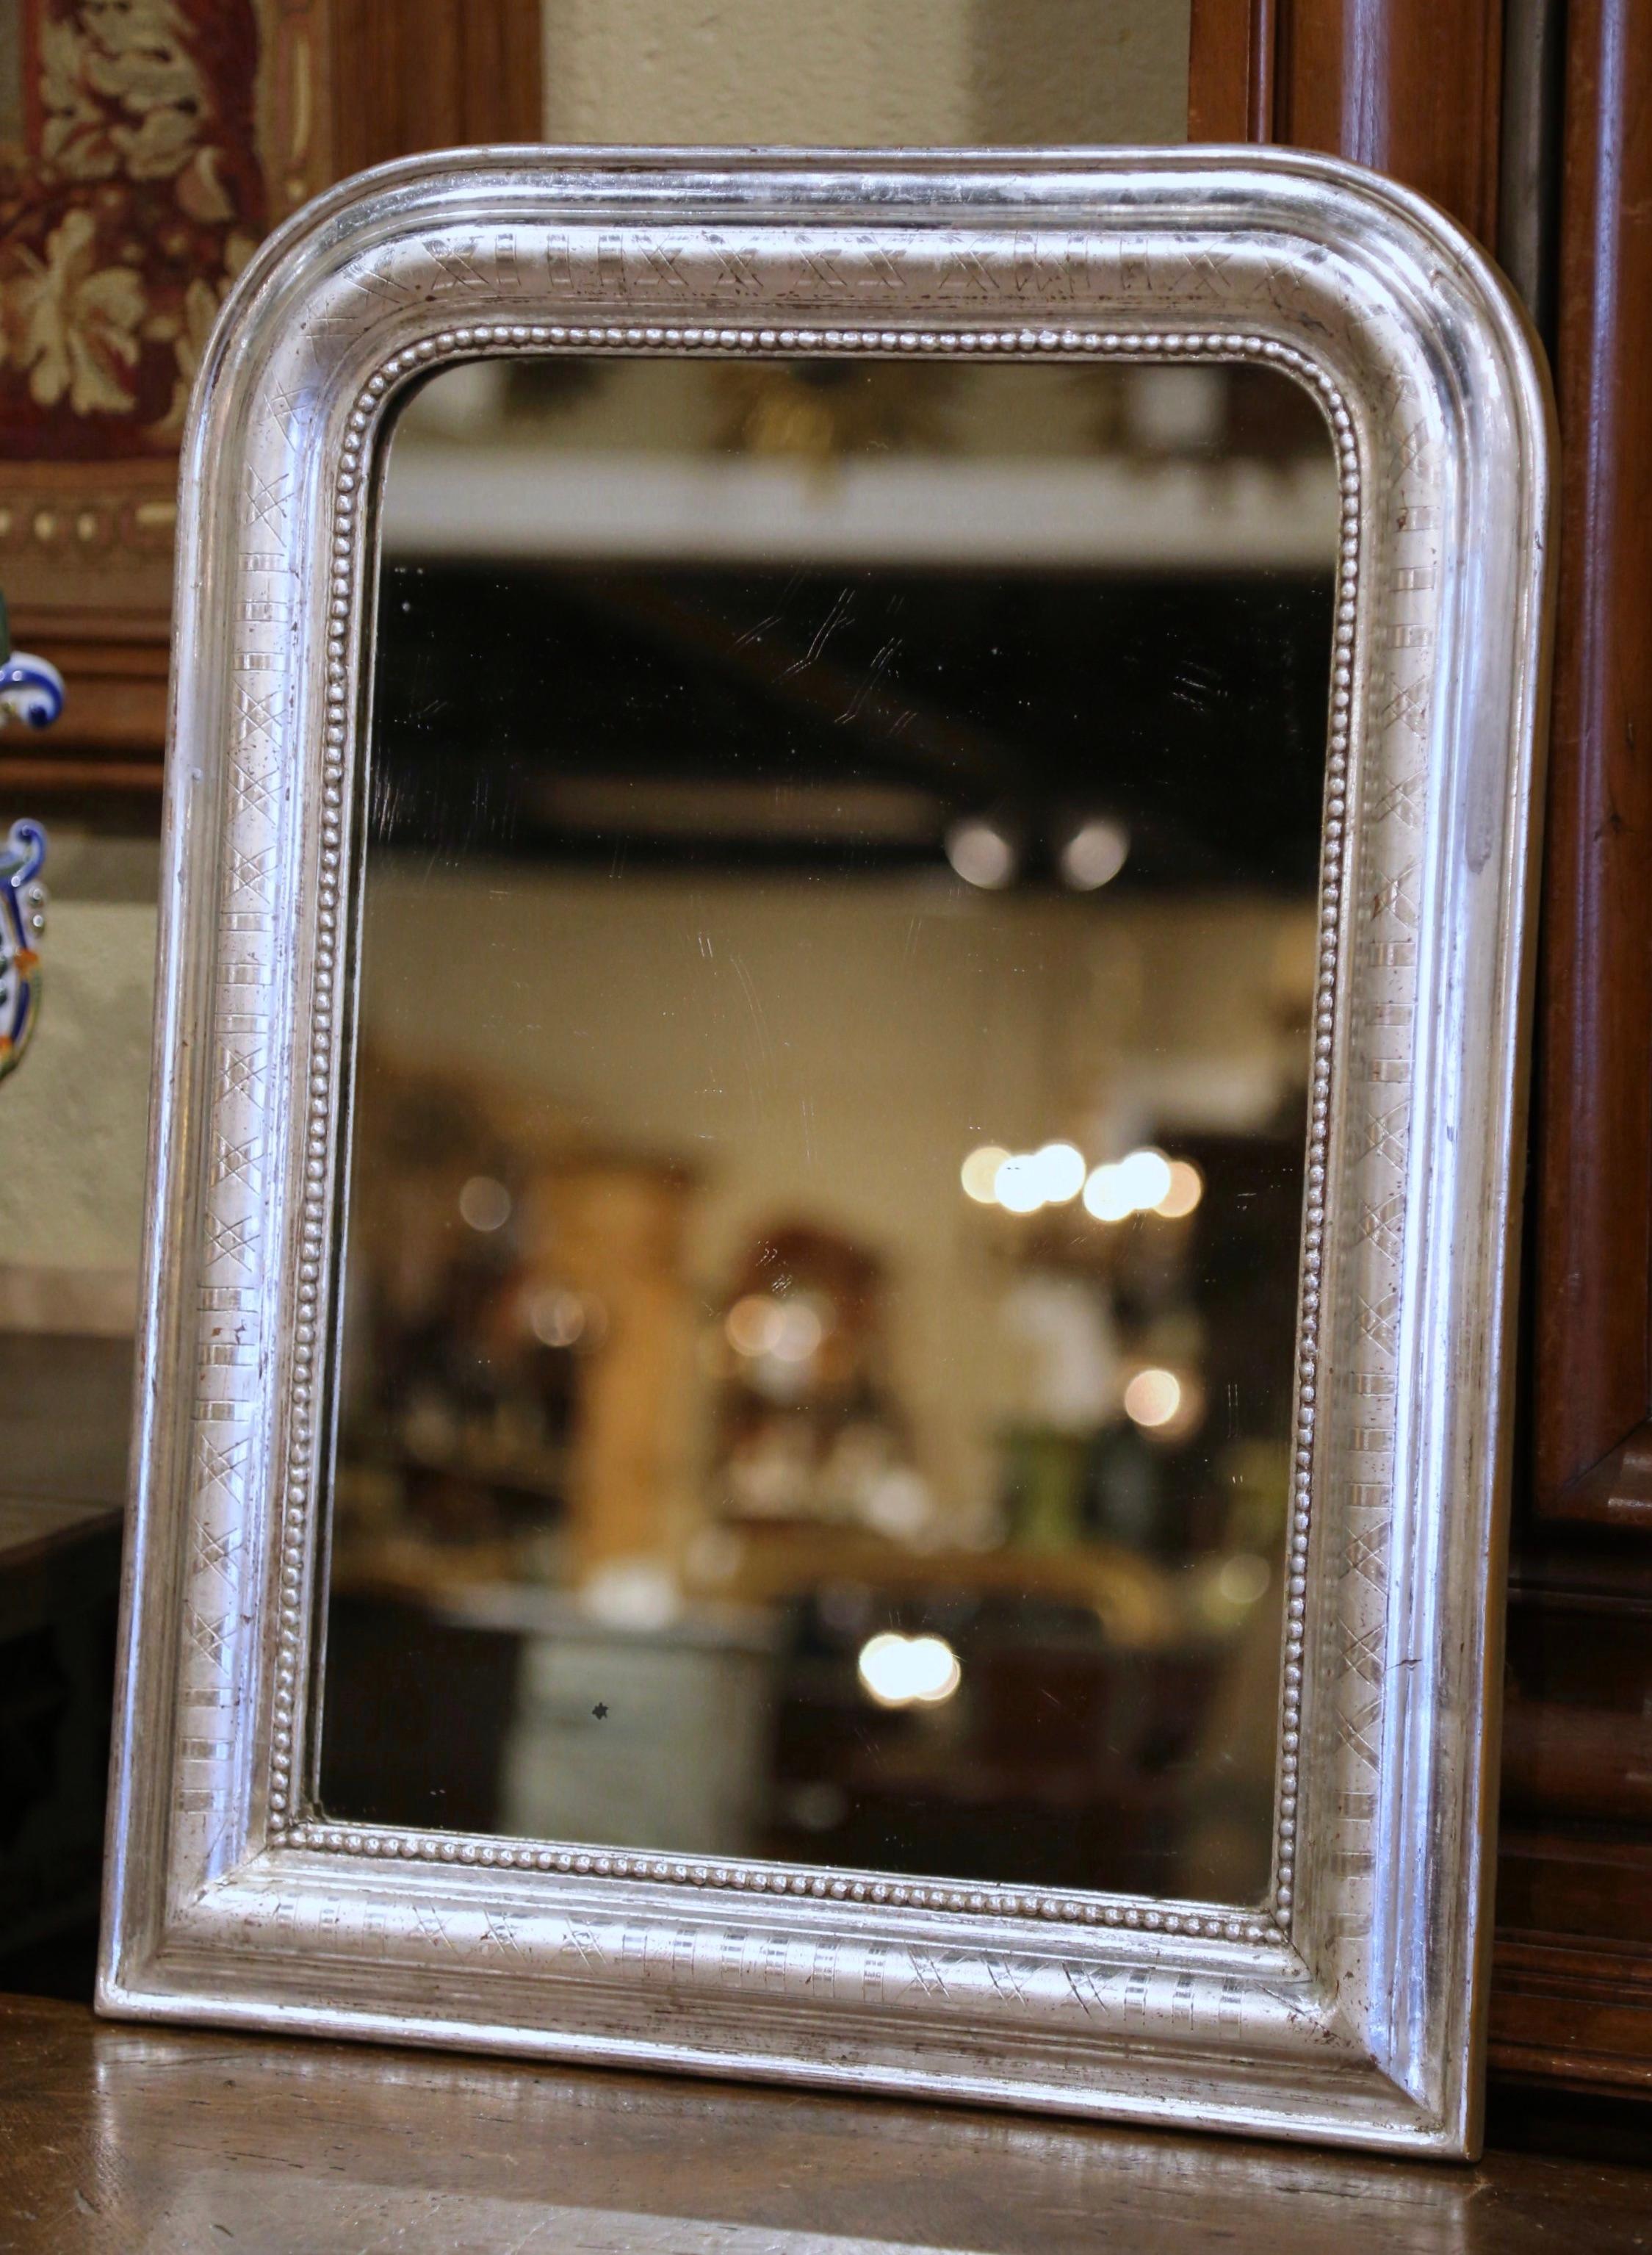 Crafted in the Burgundy region of France, circa 1870, the petite antique mirror has traditional, timeless lines with rounded corners. The elegant frame is decorated with a luxurious silver leaf finish, further embellished with an engraved two-tone